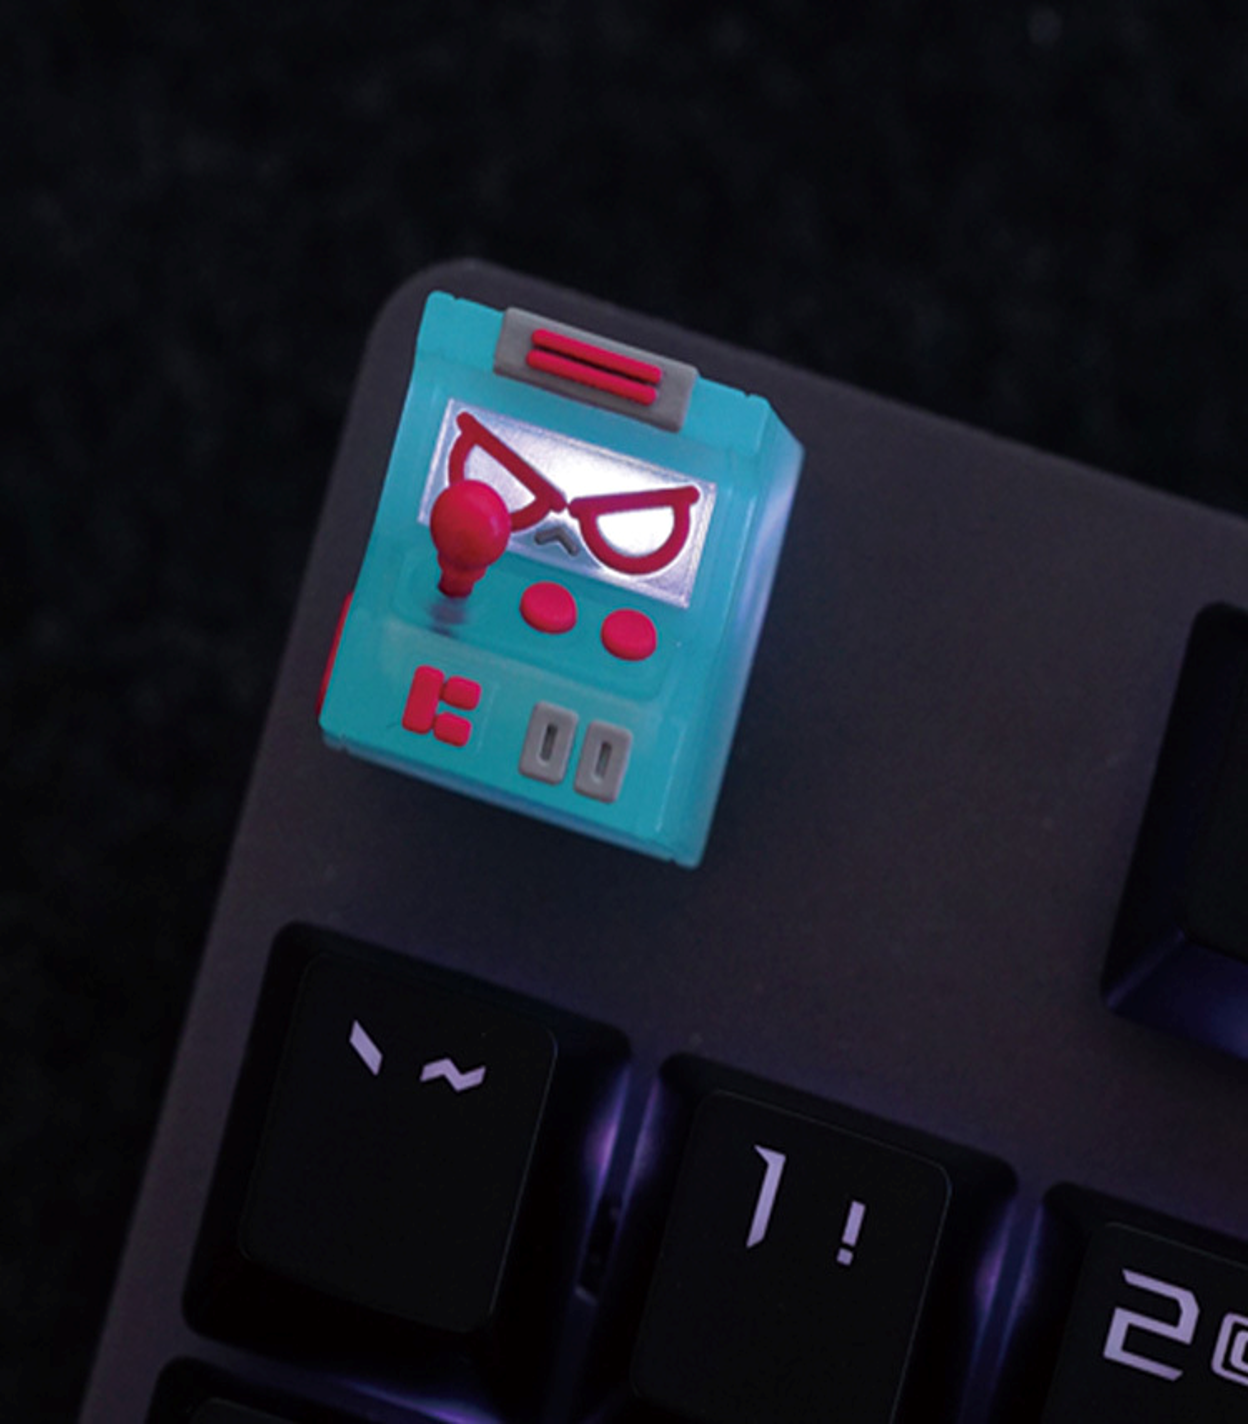 Hot Keys Project HKP Error Keycap Angry Trans Blue Red Artisan Keycap MKH5HDAL93 |0|